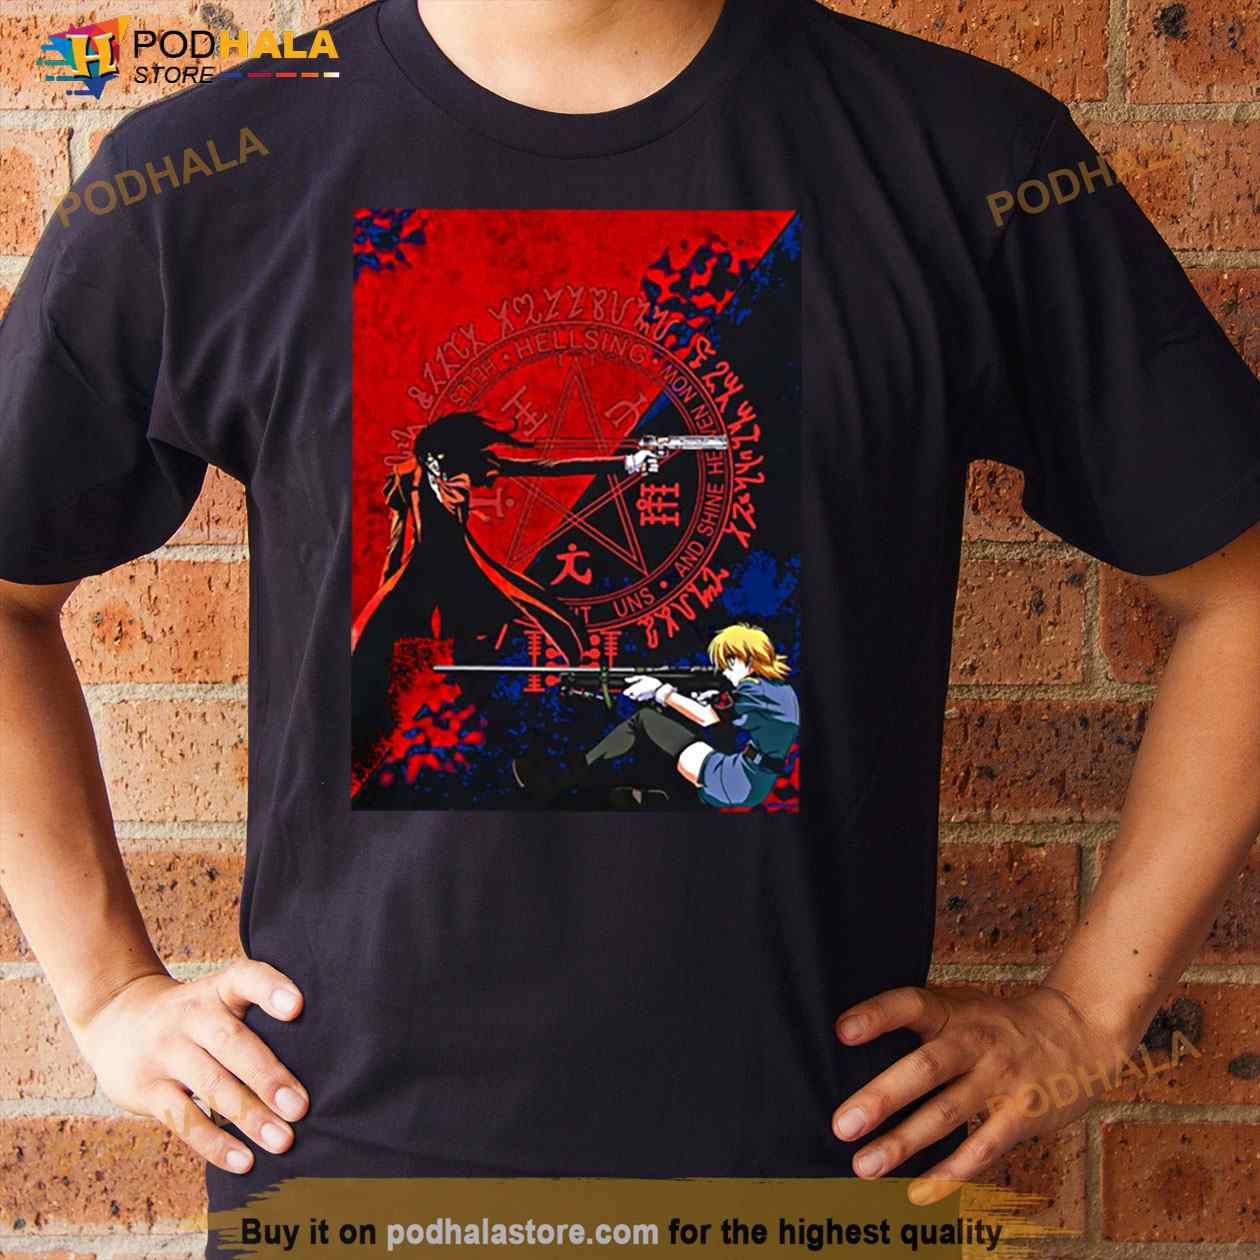 Funny 3D Anime Graphic T-shirt Anime Boy Clothing Summer Fashion Men's T-shirt  Anime Harajuku Tops Plus Size Streetwear - Price history & Review |  AliExpress Seller - EJZY Store | Alitools.io